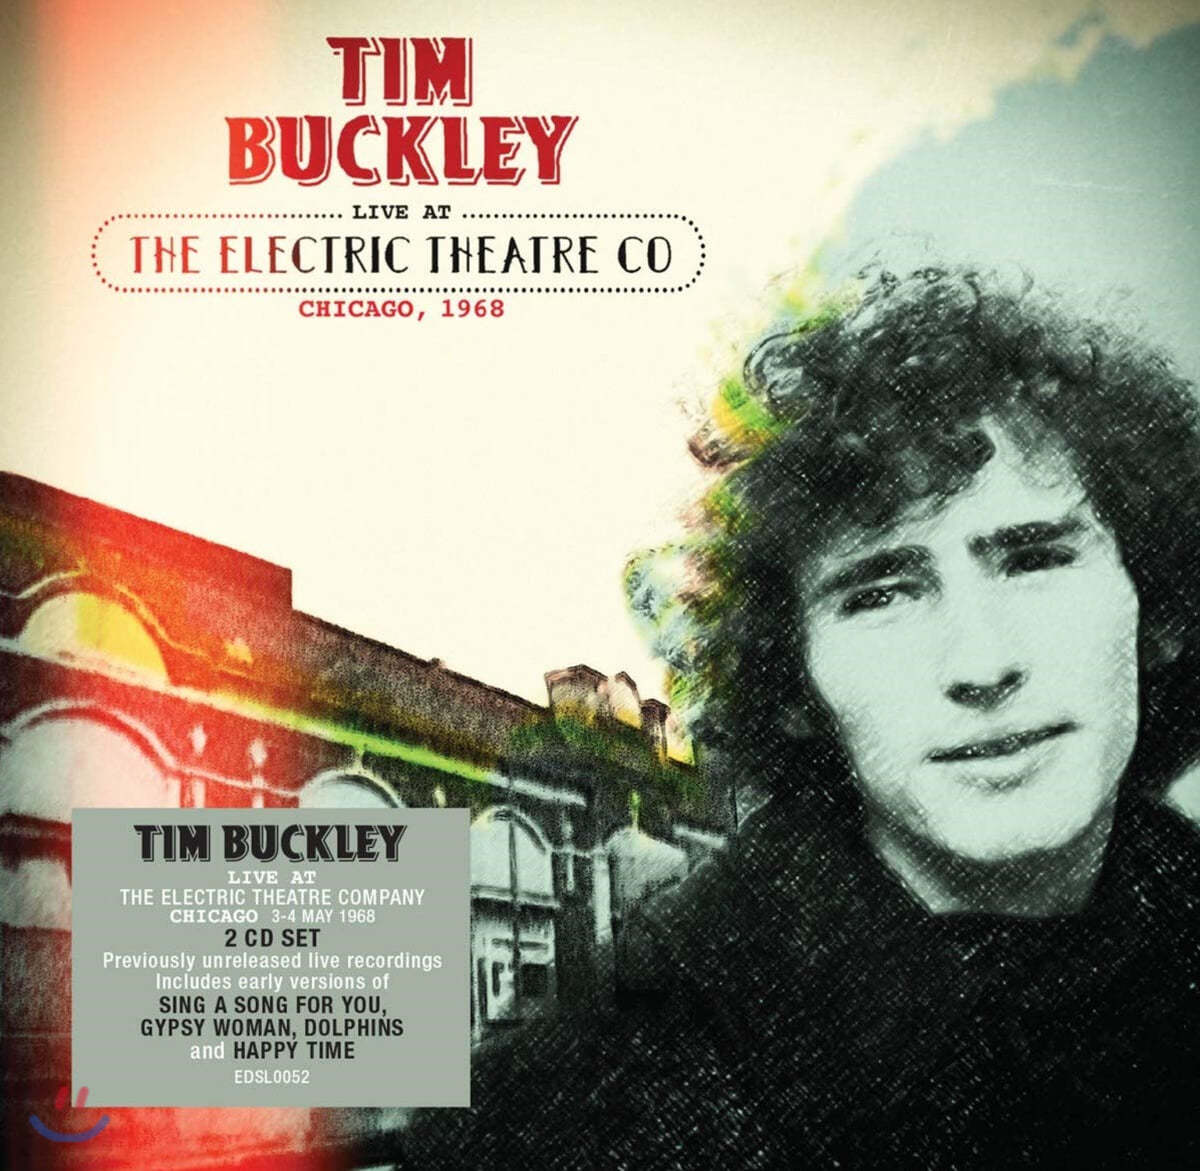 Tim Buckley (팀 버클리) - Live at the Electric Theatre Co, Chicago, 1968